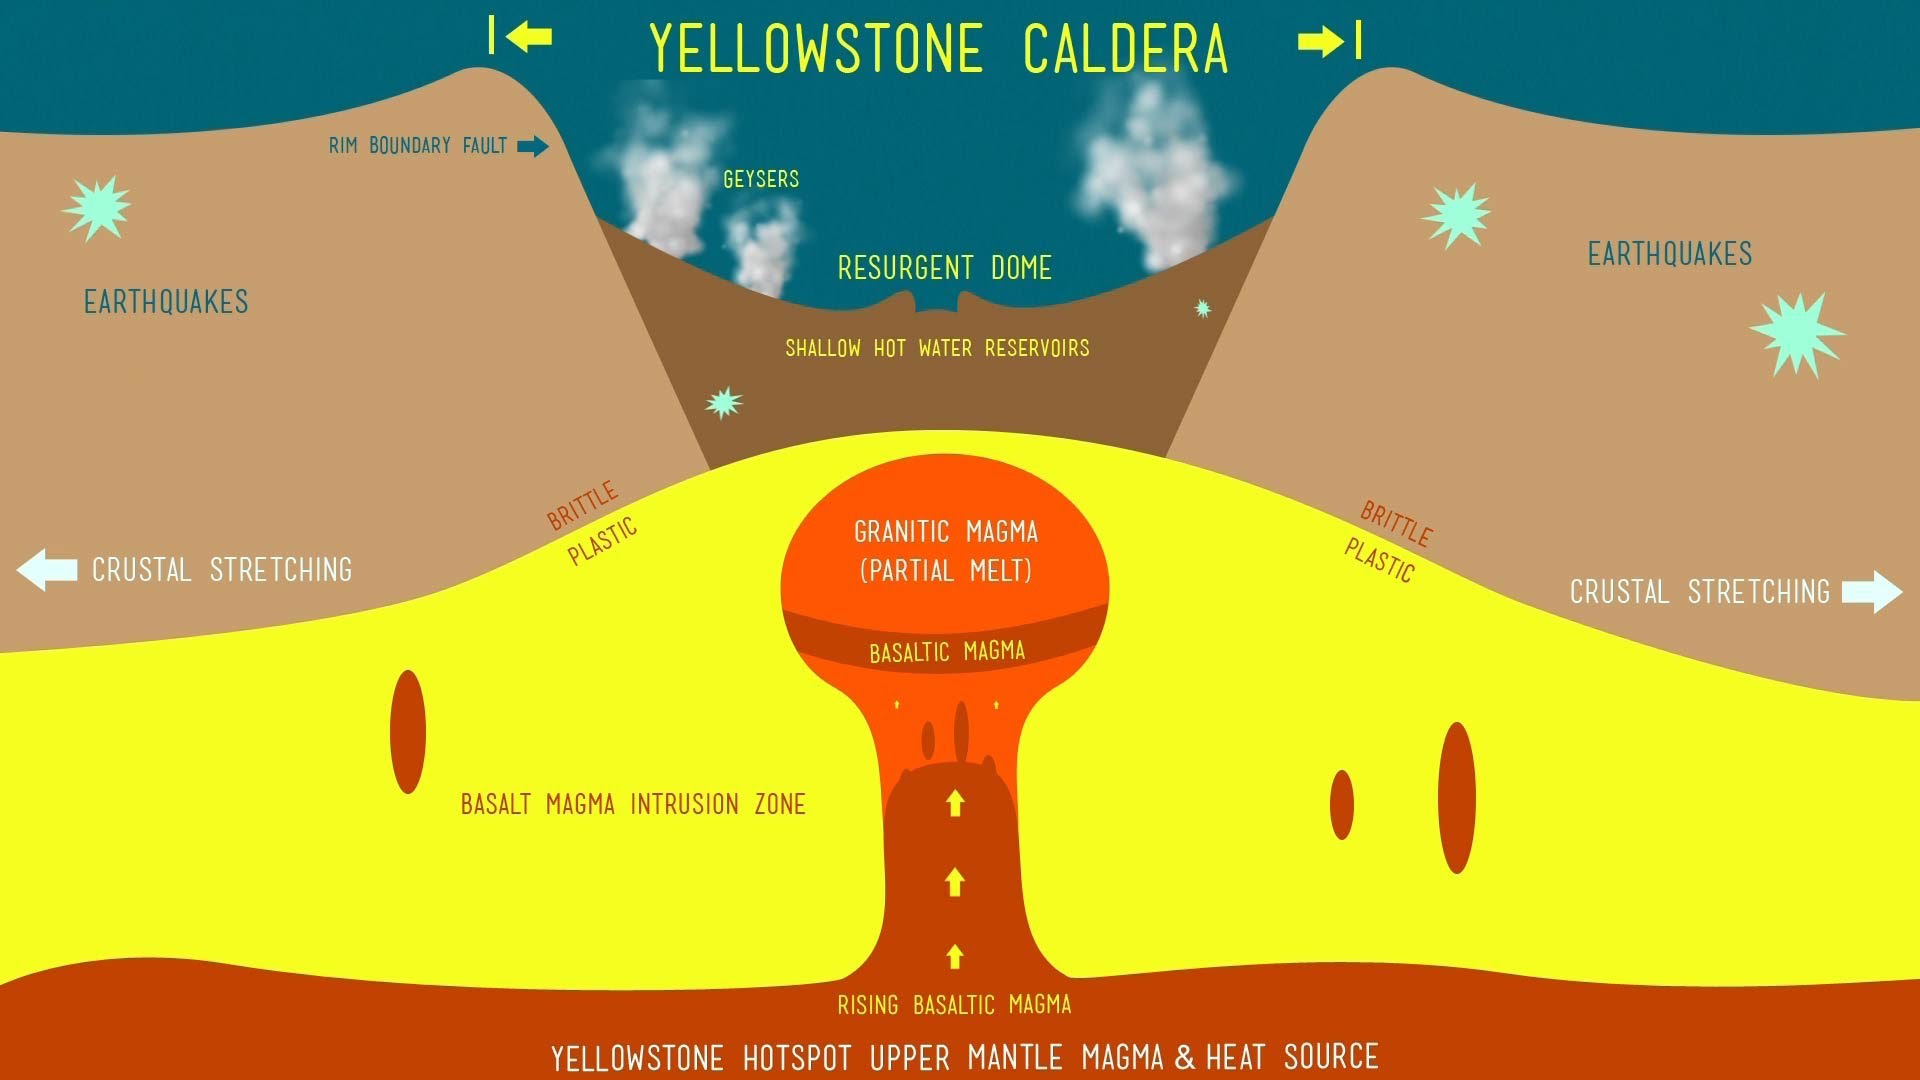 Yellowstone supervolcano can generate electricity if NASA cools it before eruption1920 x 1080